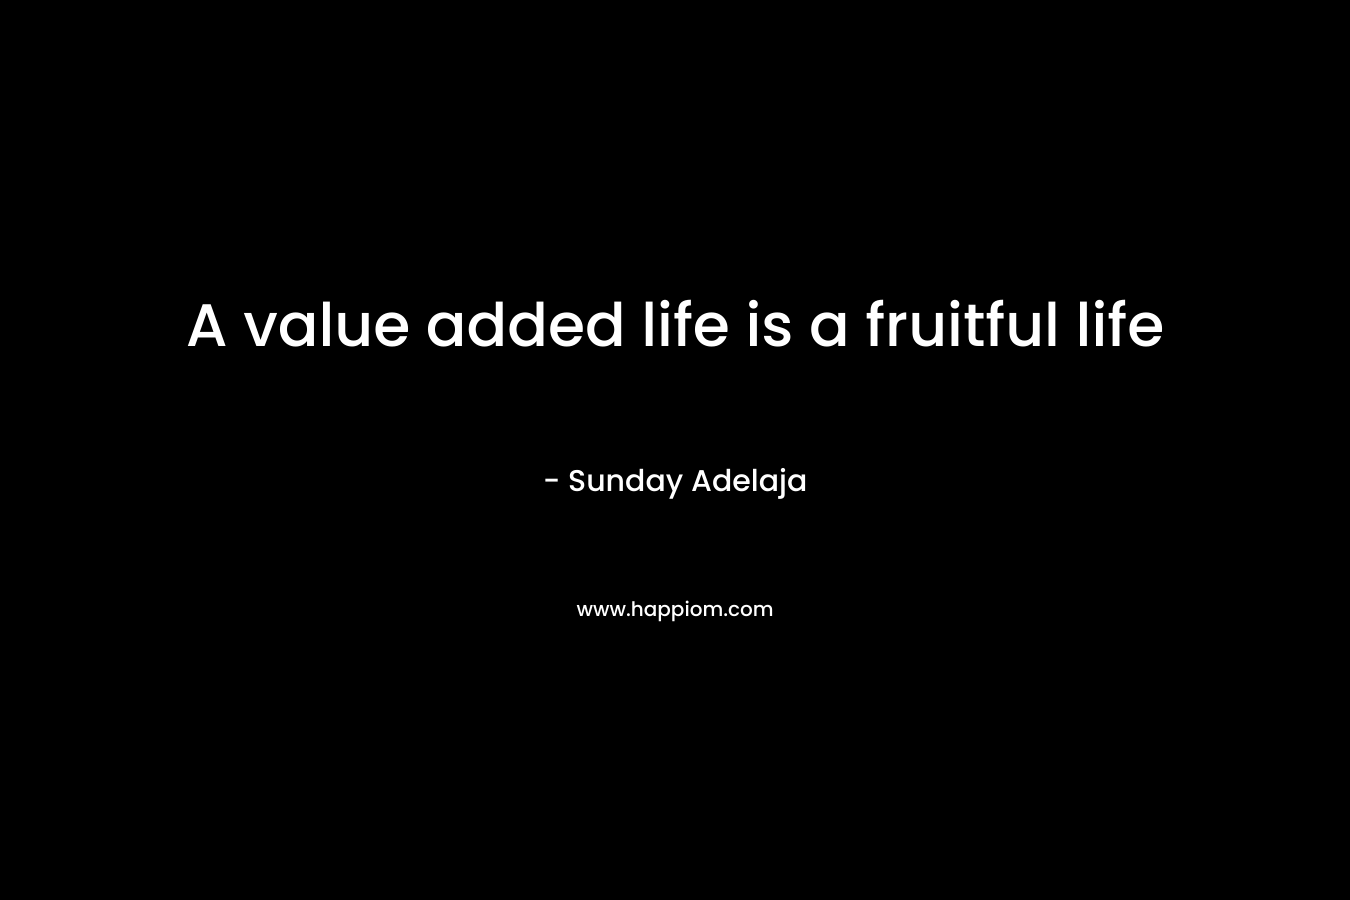 A value added life is a fruitful life